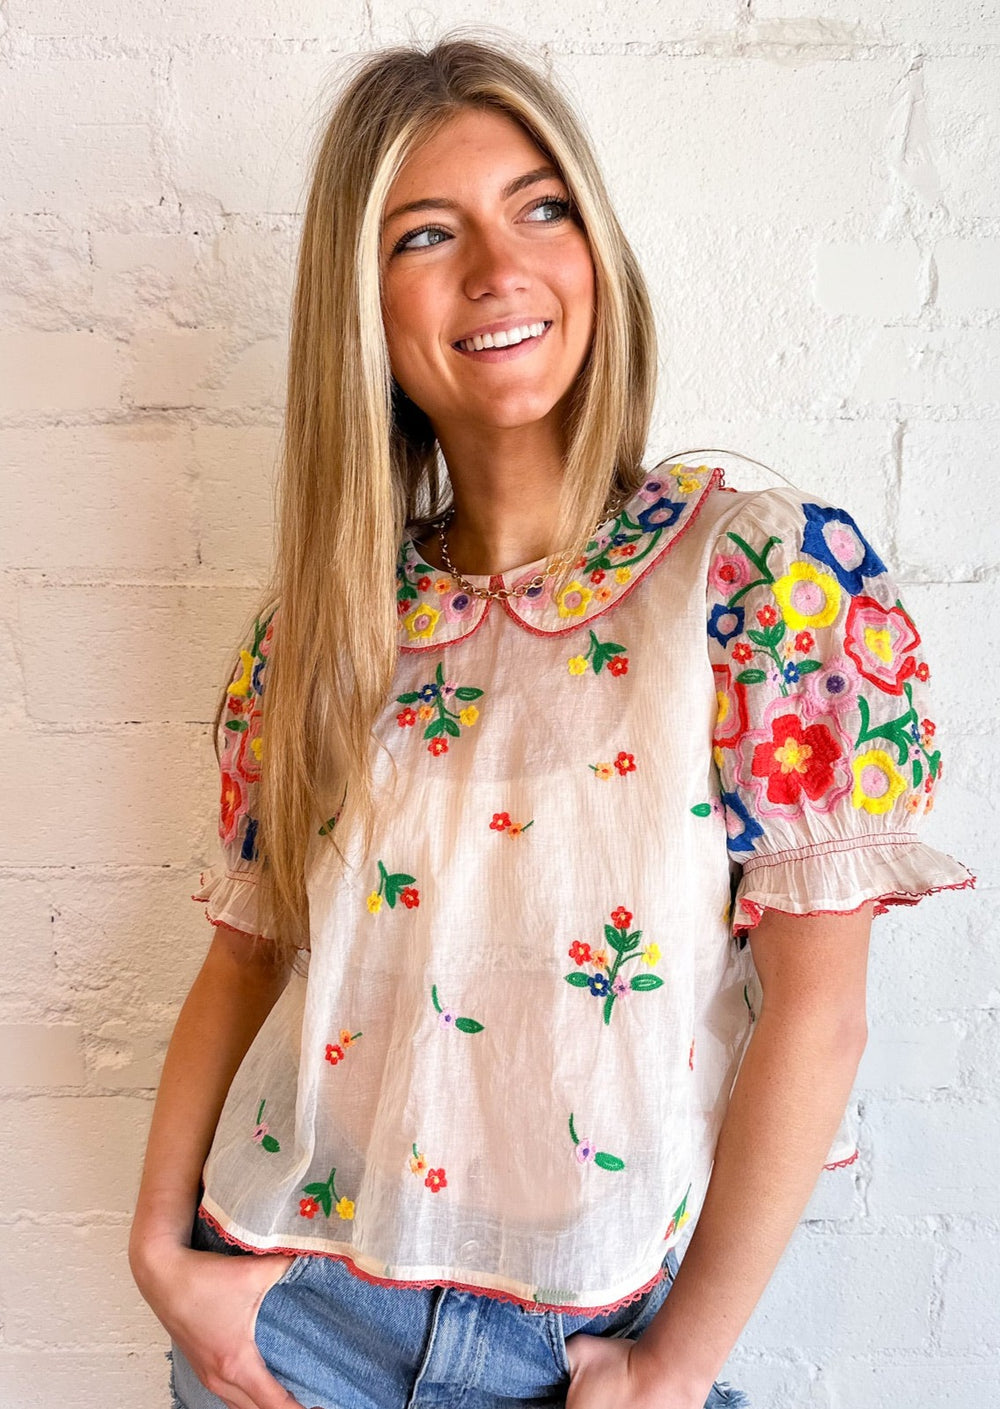 Free People Flowers Of Love Top, Tops, Free People, Adeline, dallas boutique, dallas texas, texas boutique, women's boutique dallas, adeline boutique, dallas boutique, trendy boutique, affordable boutique